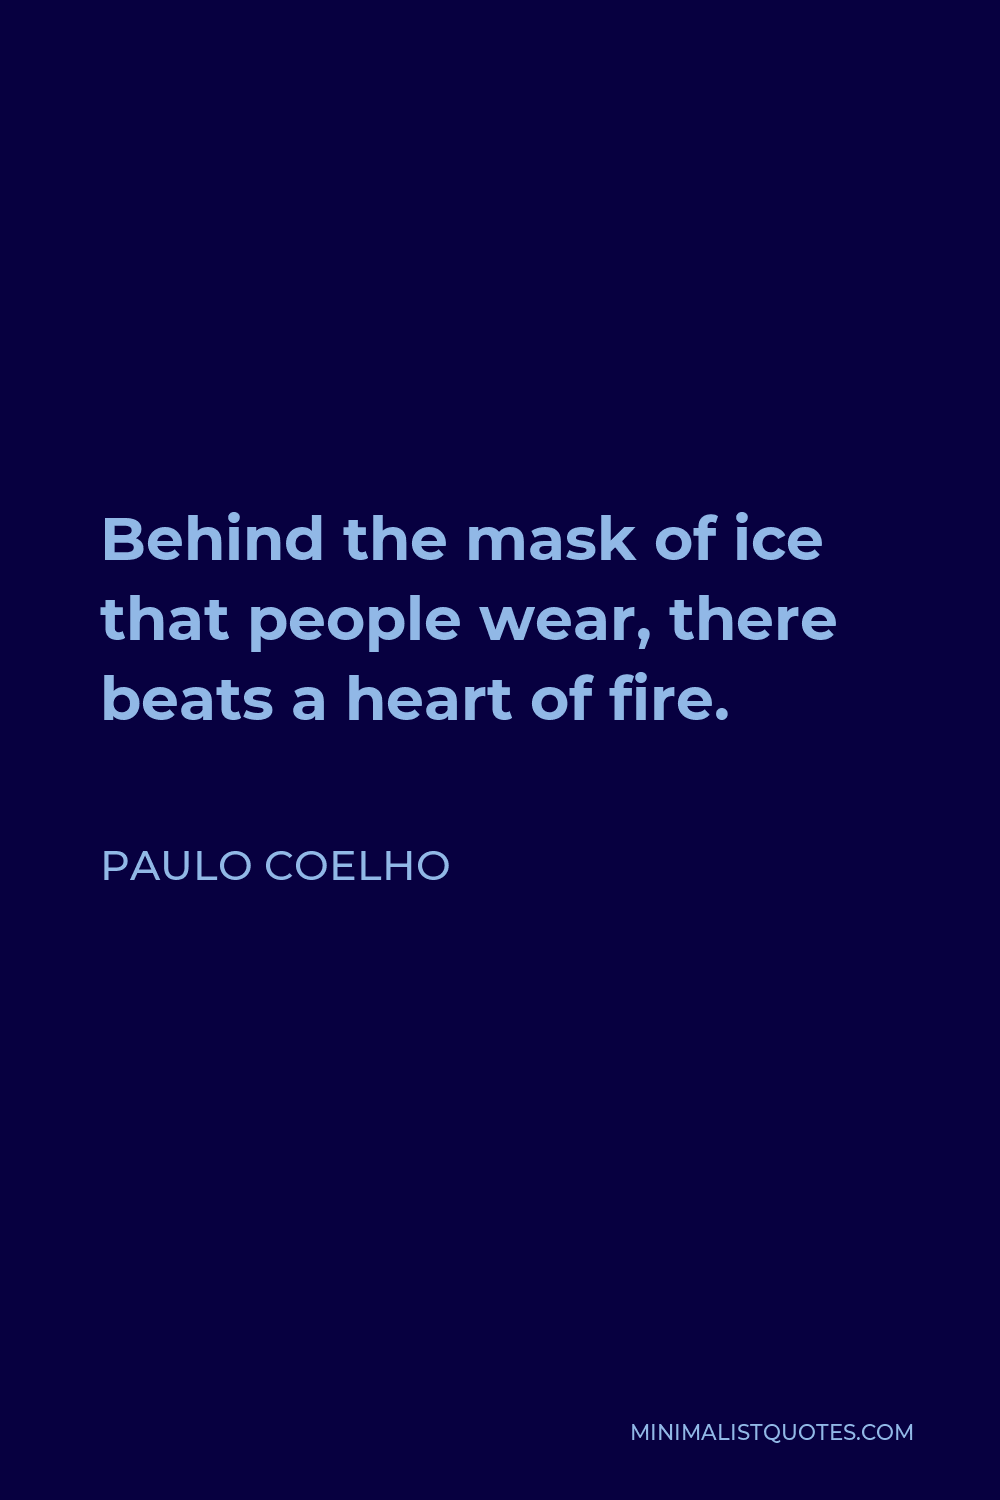 Paulo Coelho Quote - Behind the mask of ice that people wear, there beats a heart of fire.